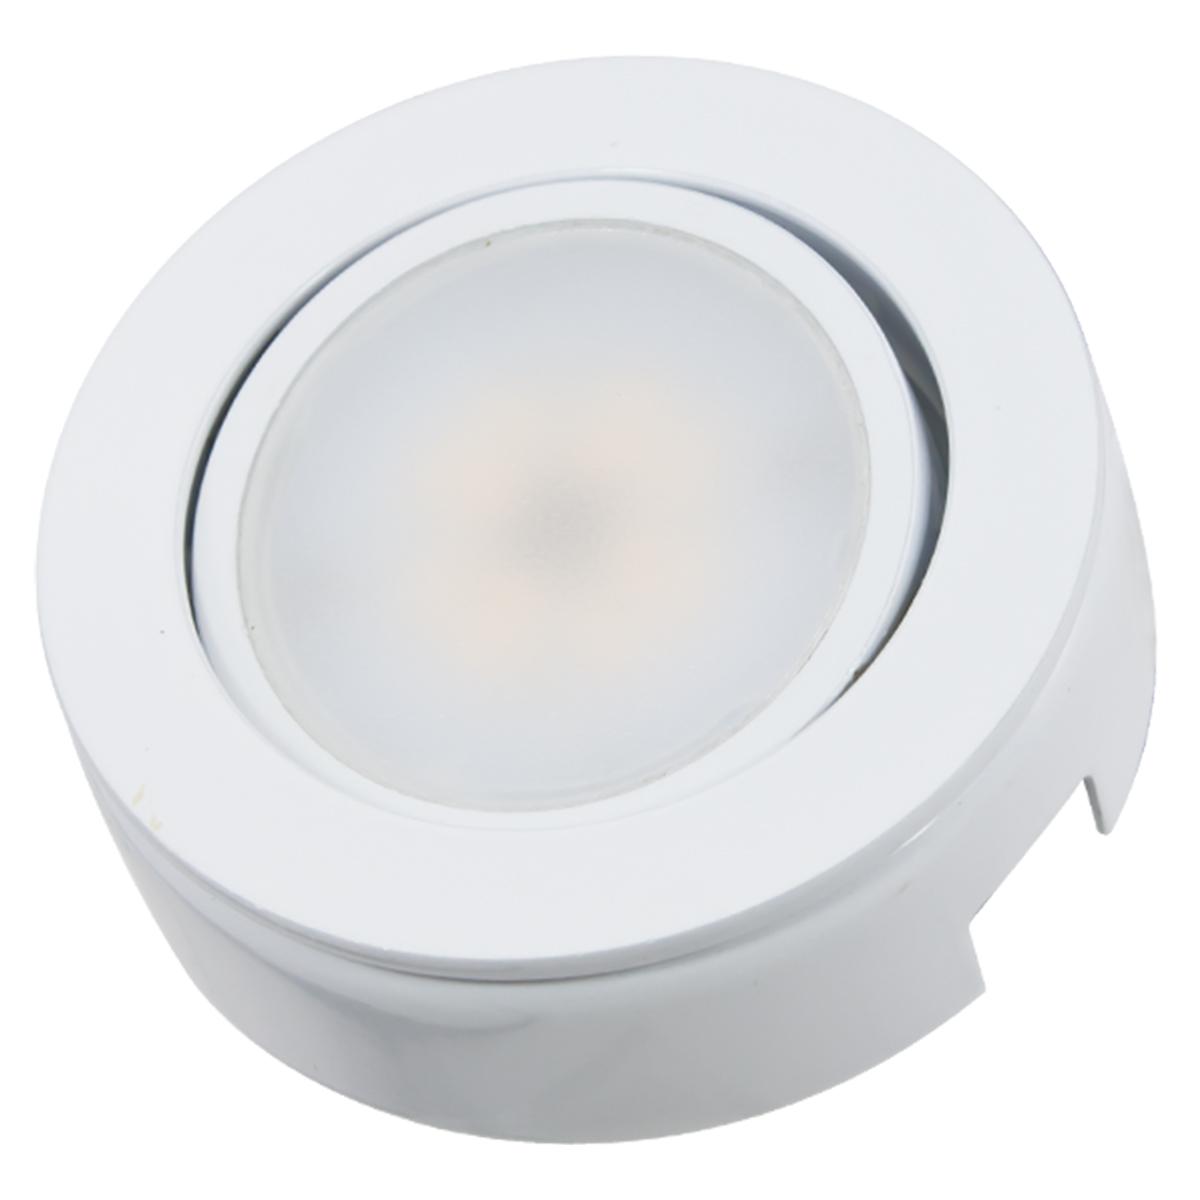 MVP LED Puck Light with Lead and Tail wires, 4.3 Watts, 2700K, 120V, White - Bees Lighting